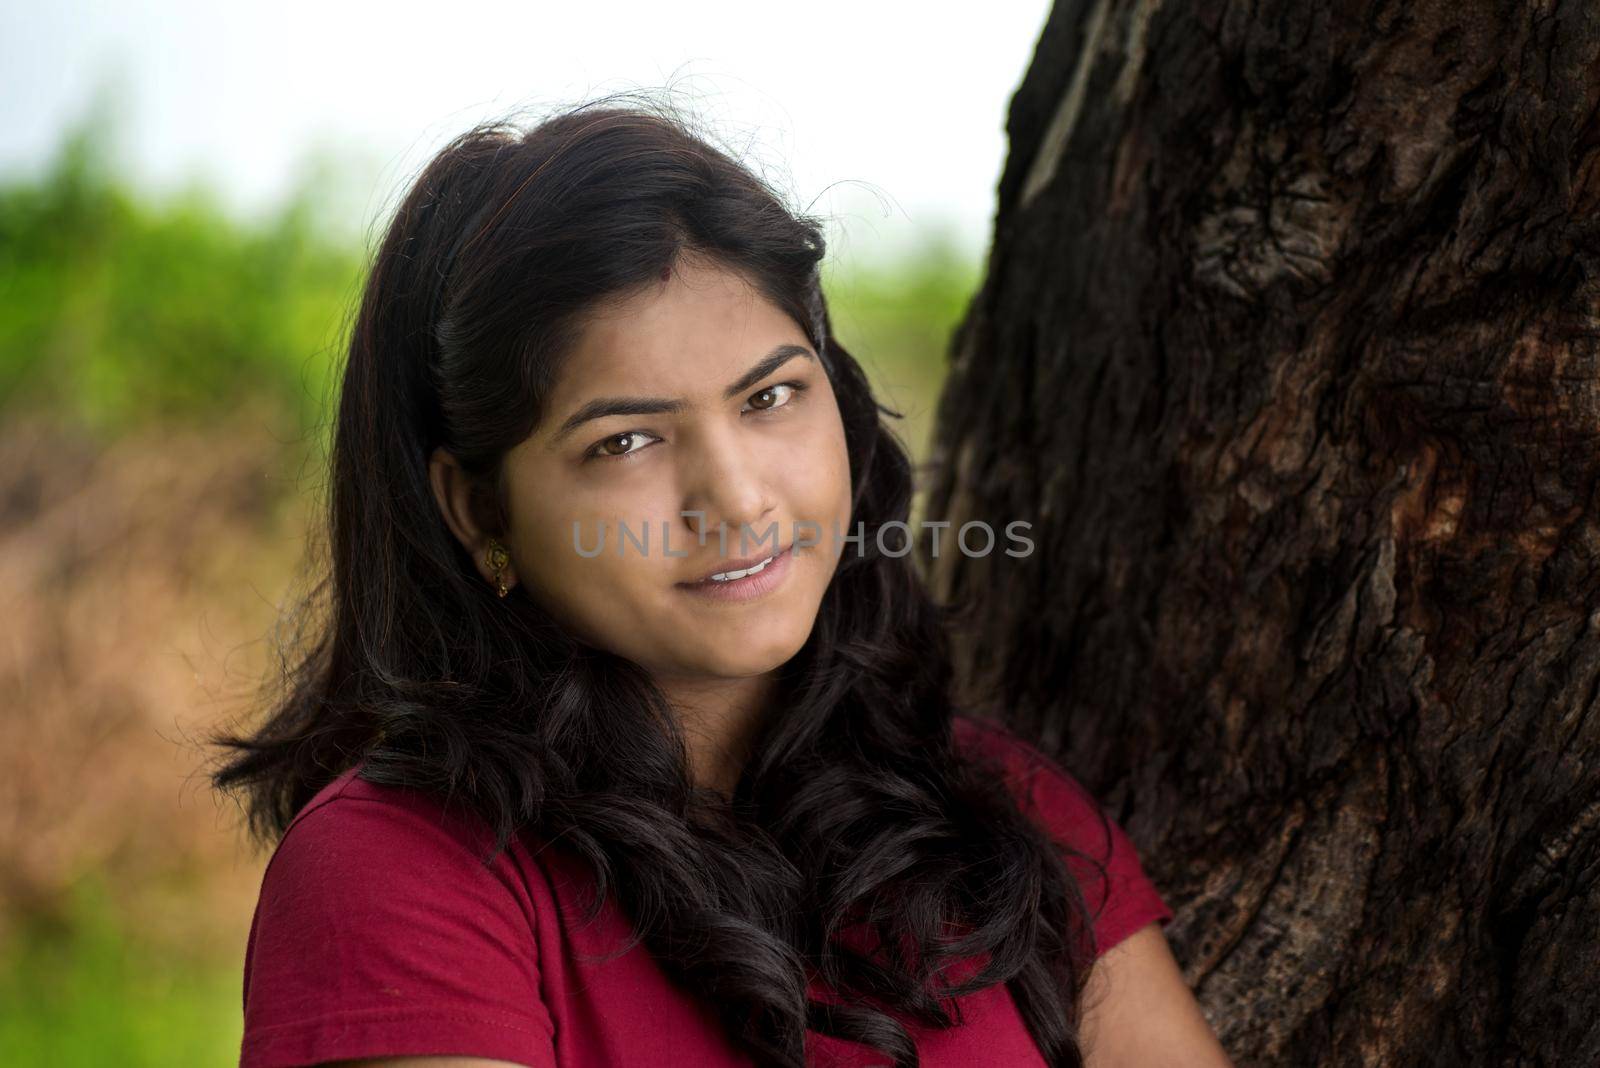 Portrait of beautiful Young girl outdoors in park.